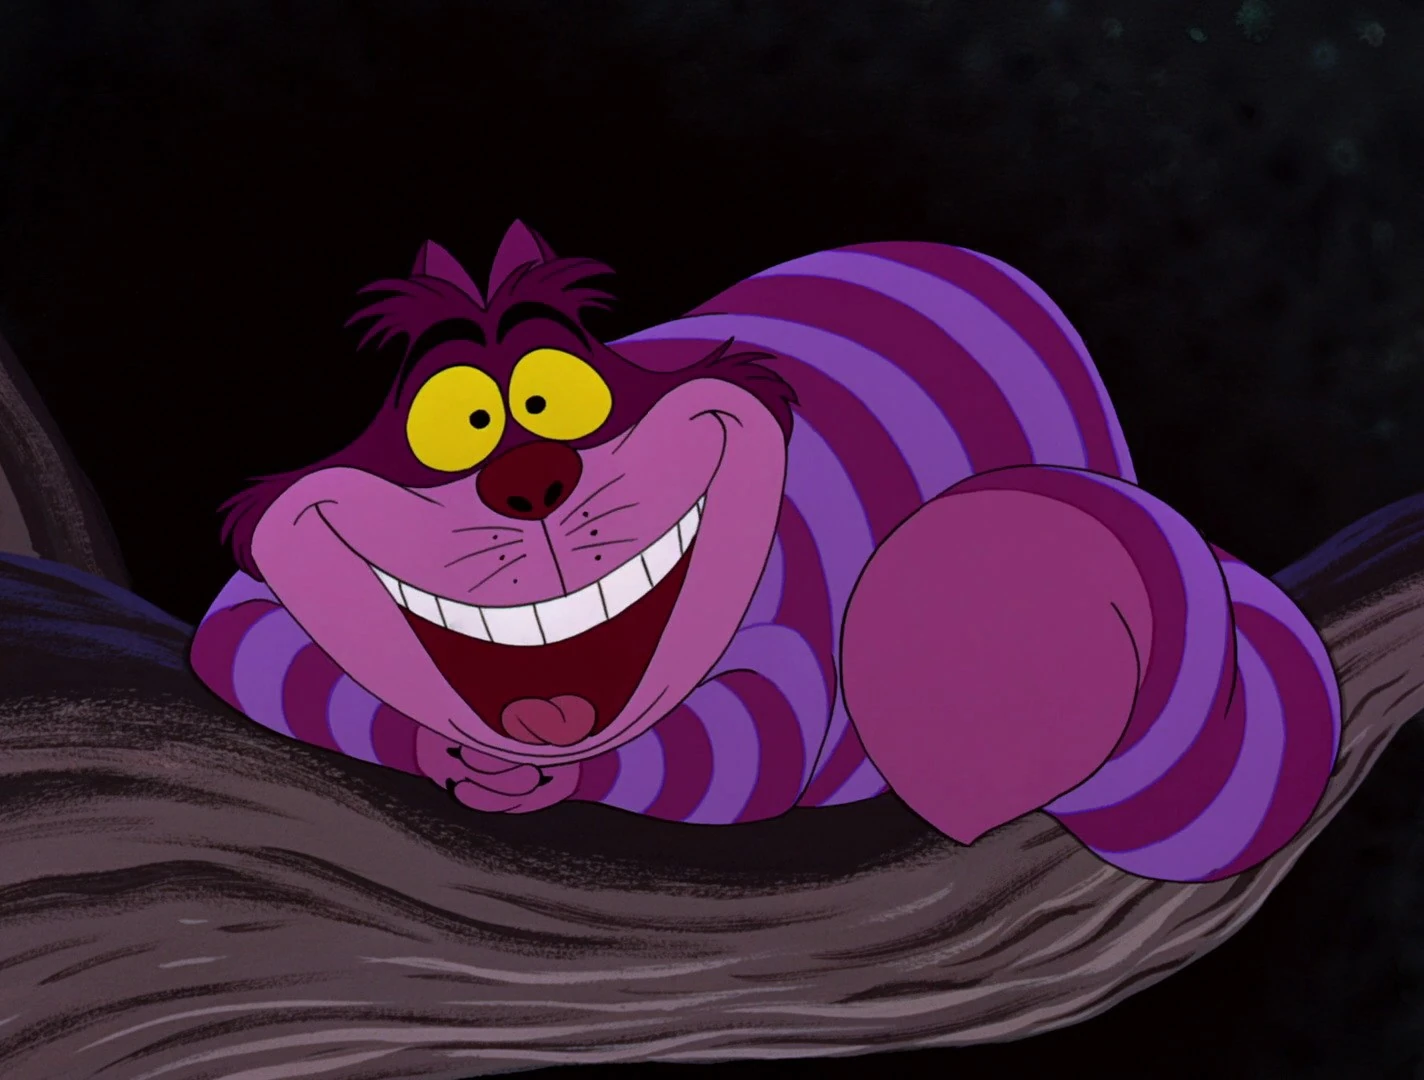 Cheshire Cat smiling on a tree branch